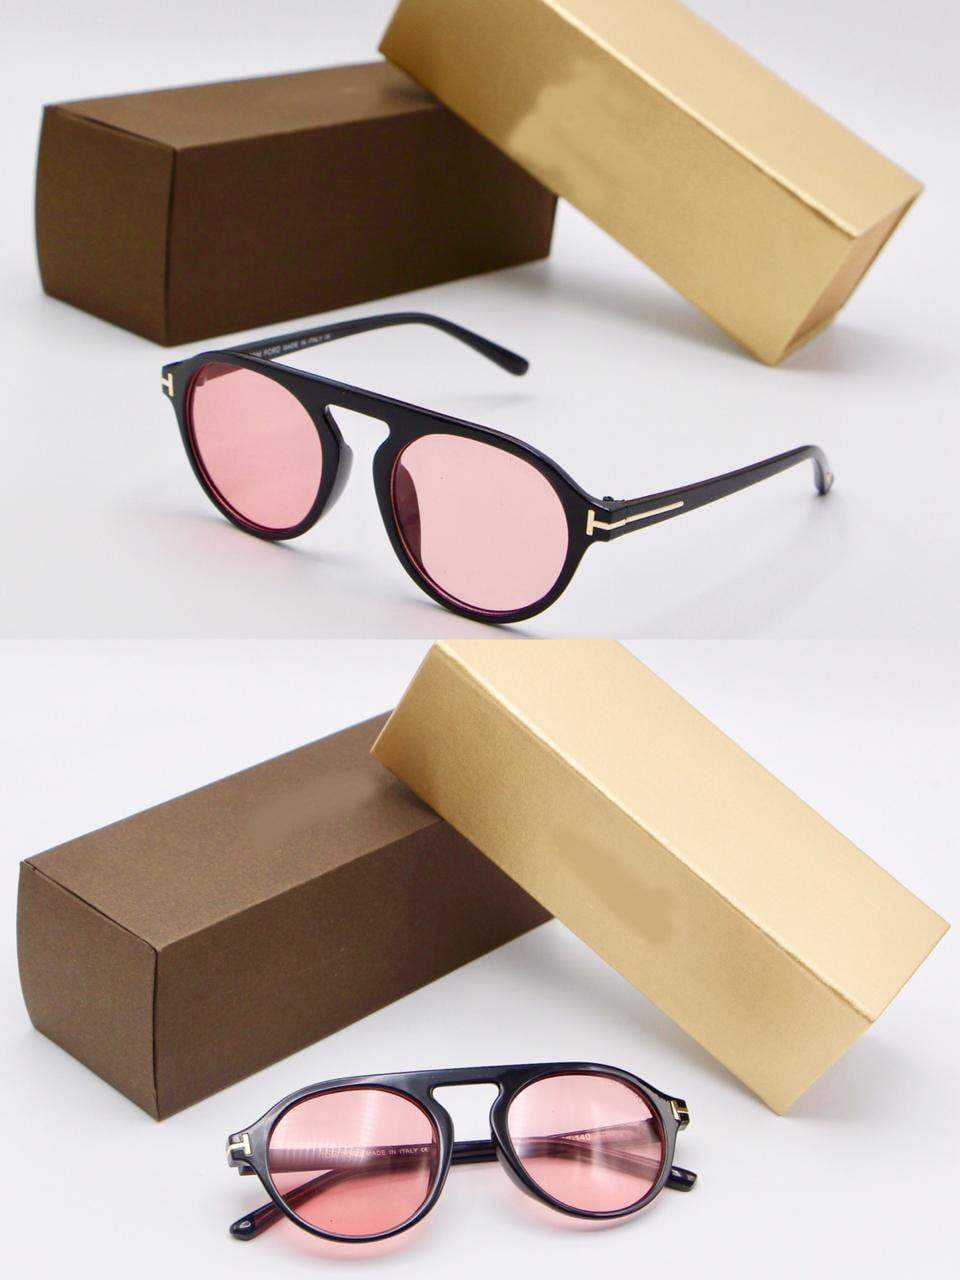 Candy Colour Round Sunglasses For Men And Women-FunkyTradition - FunkyTradition